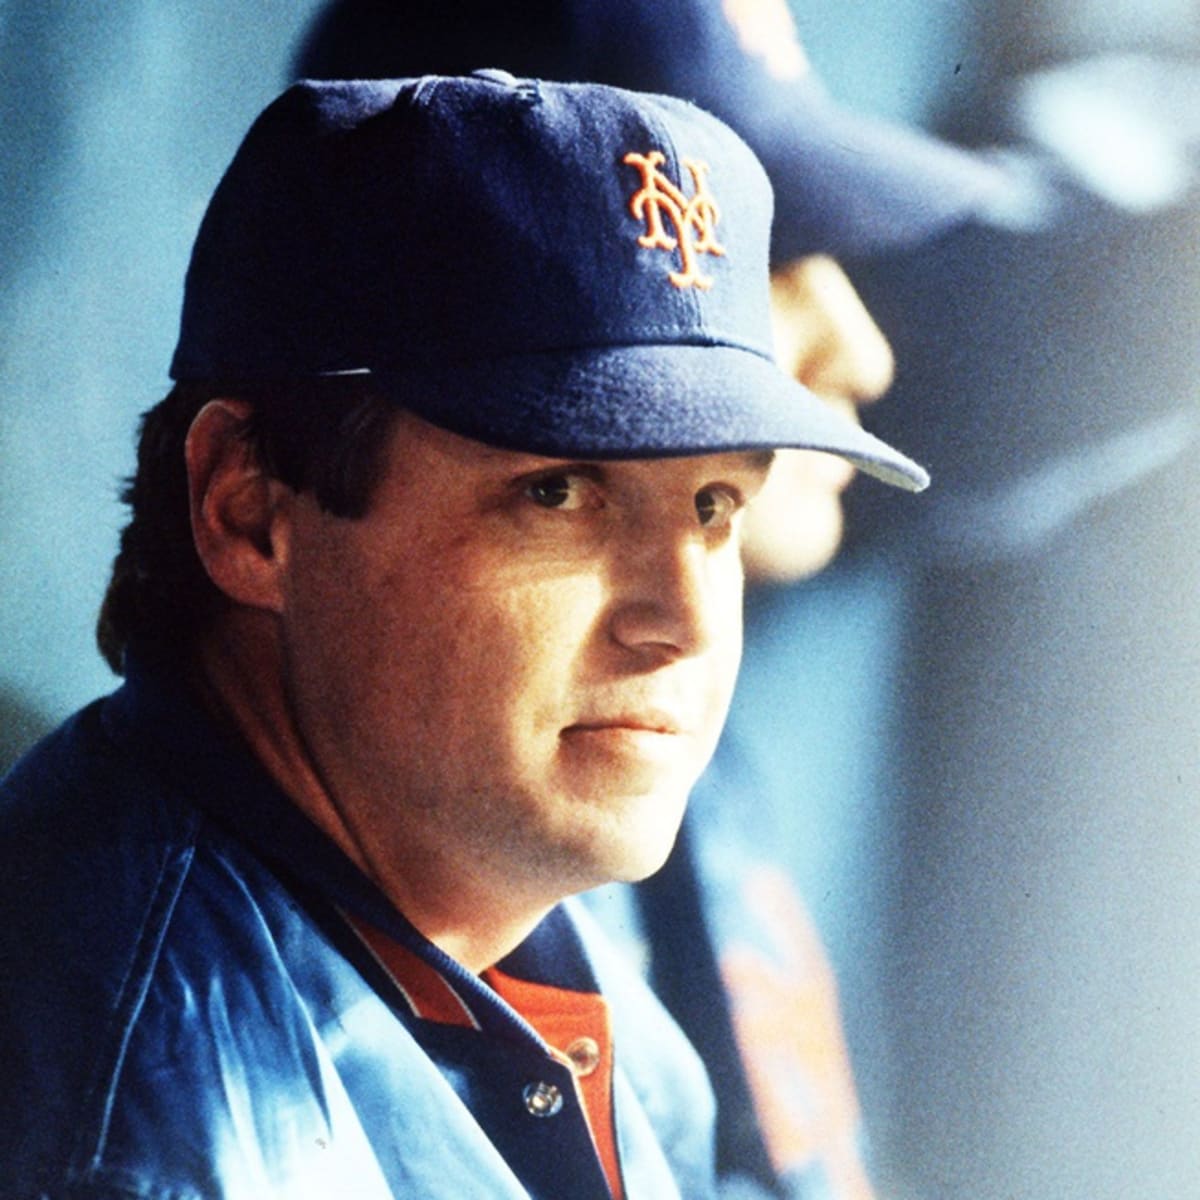 The Last Icon: Tom Seaver and His Times